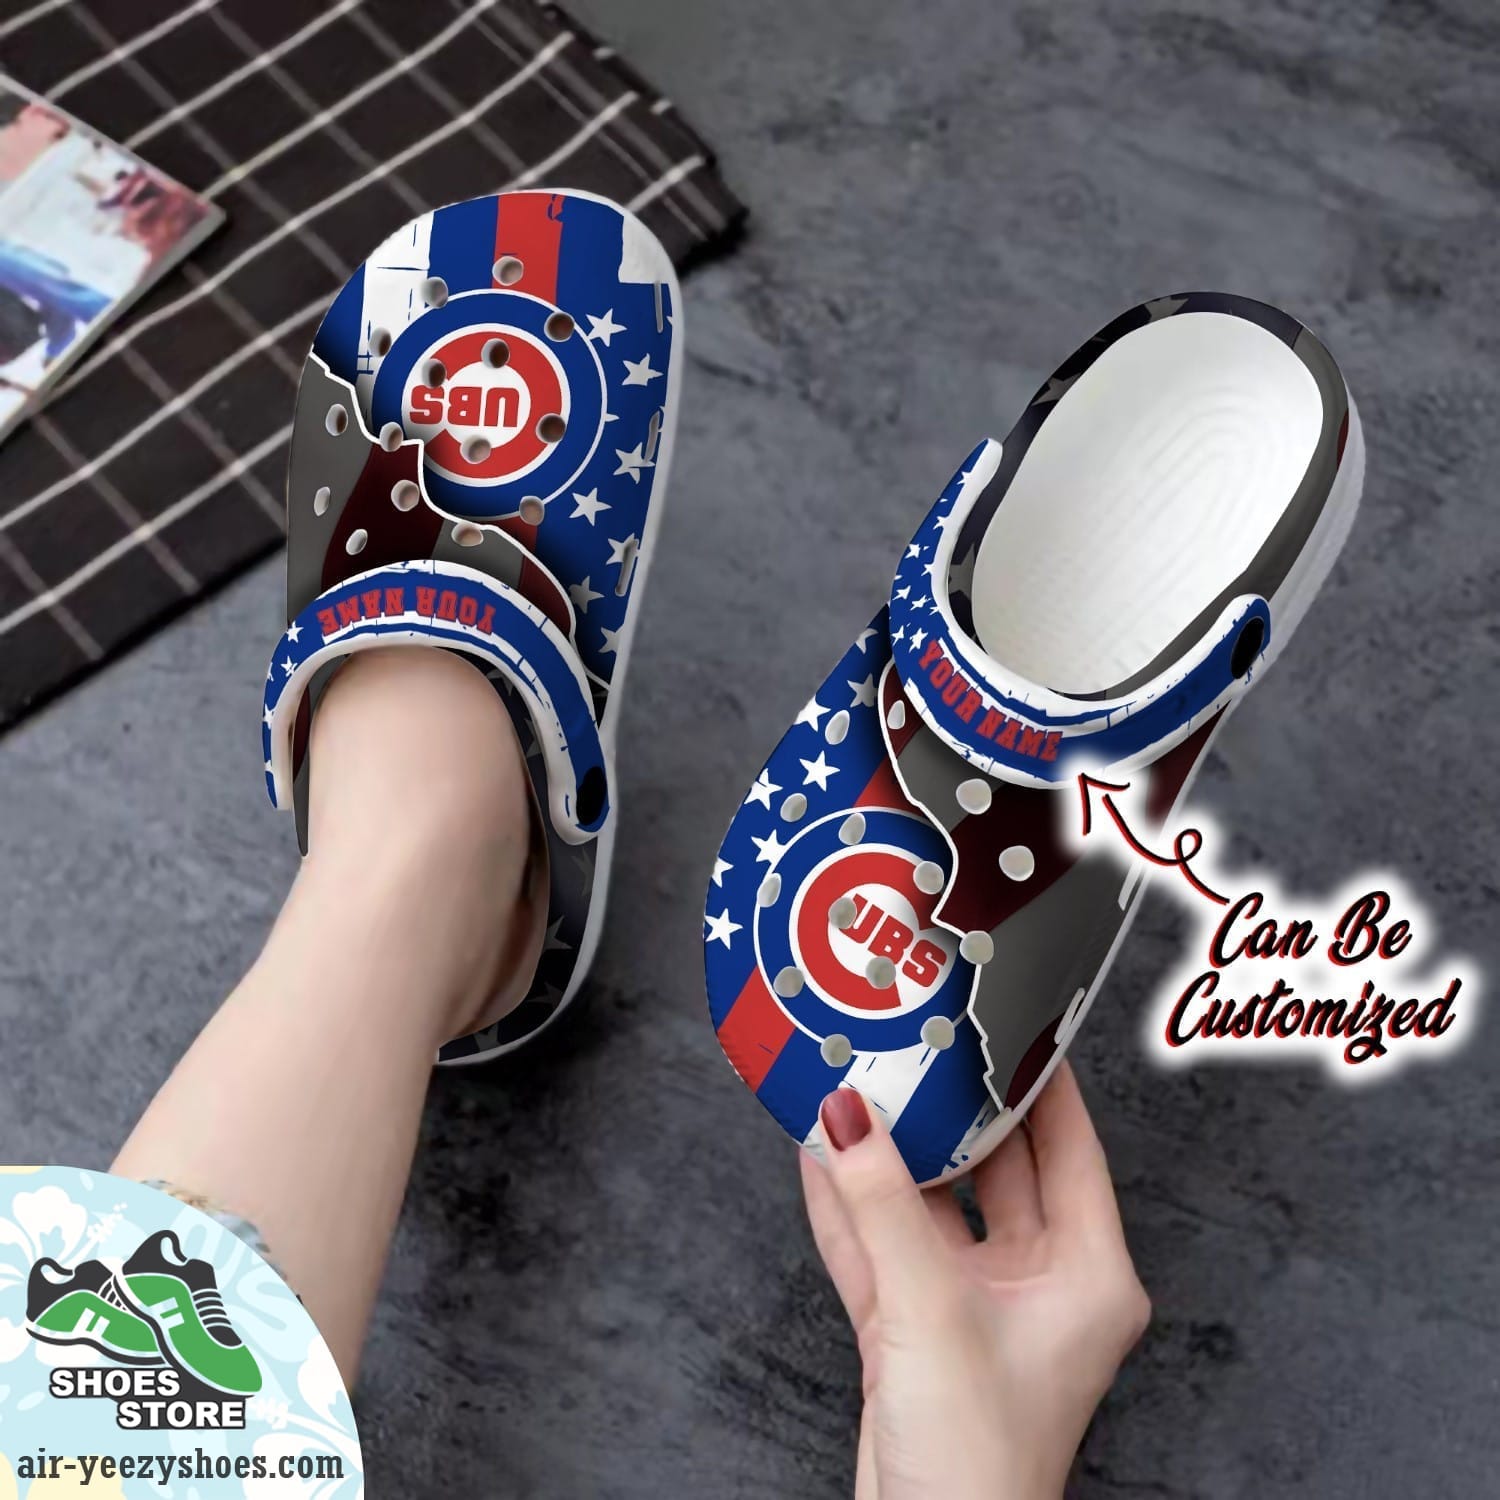 Personalized Chicago Cubs Baseball Team American Flag Line Clog Shoes, Cubs Crocs